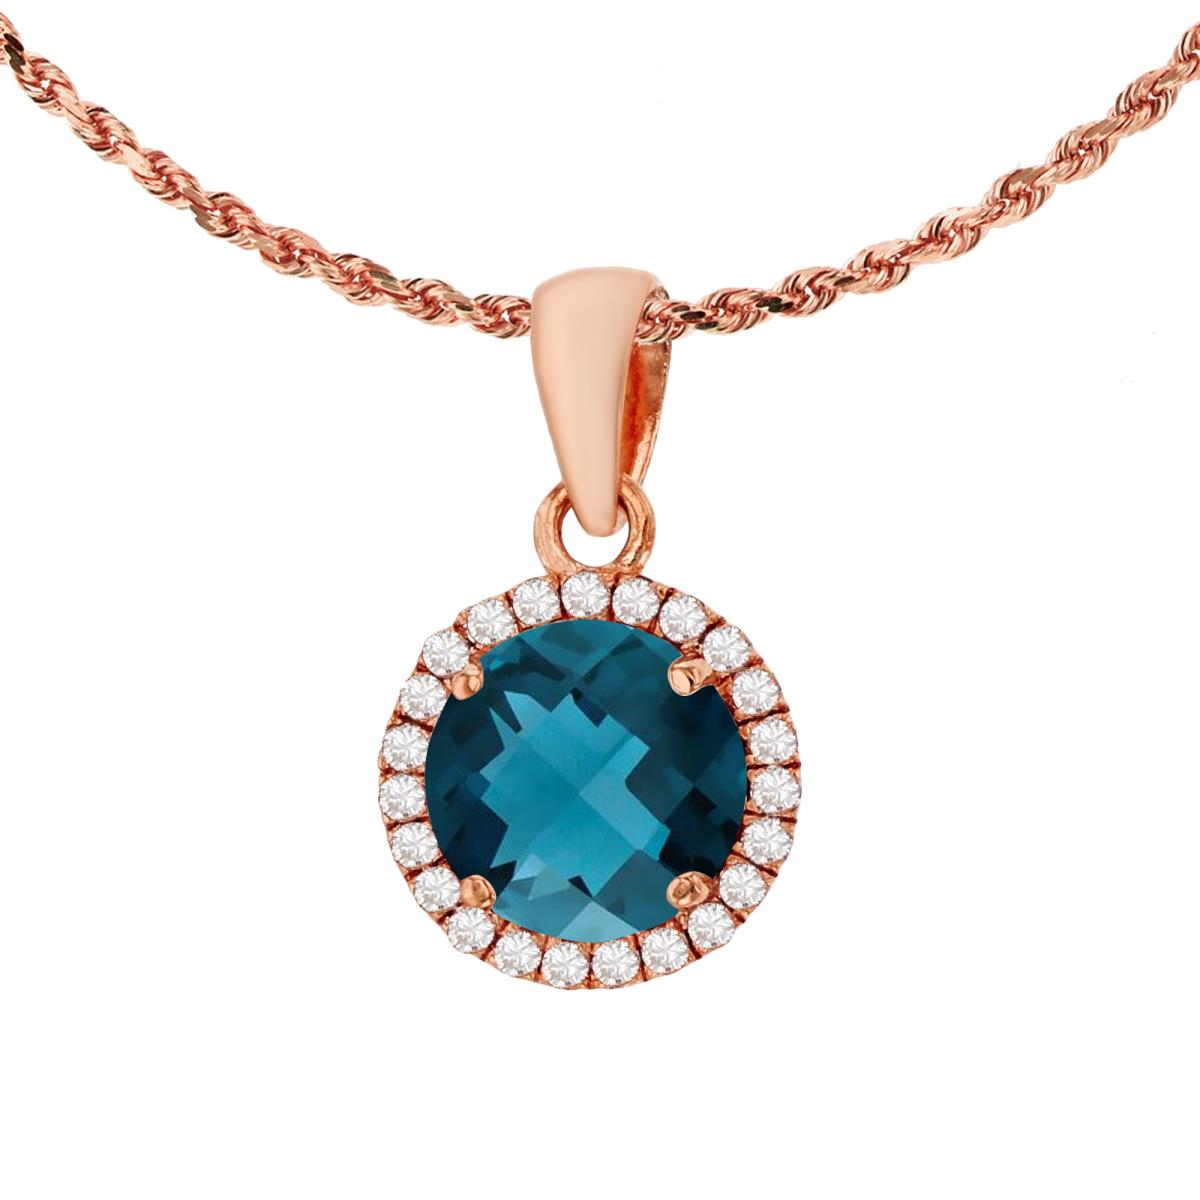 10K Rose Gold 7mm Round London Blue Topaz & 0.12 CTTW Diamond Halo 18" Rope Chain Necklace